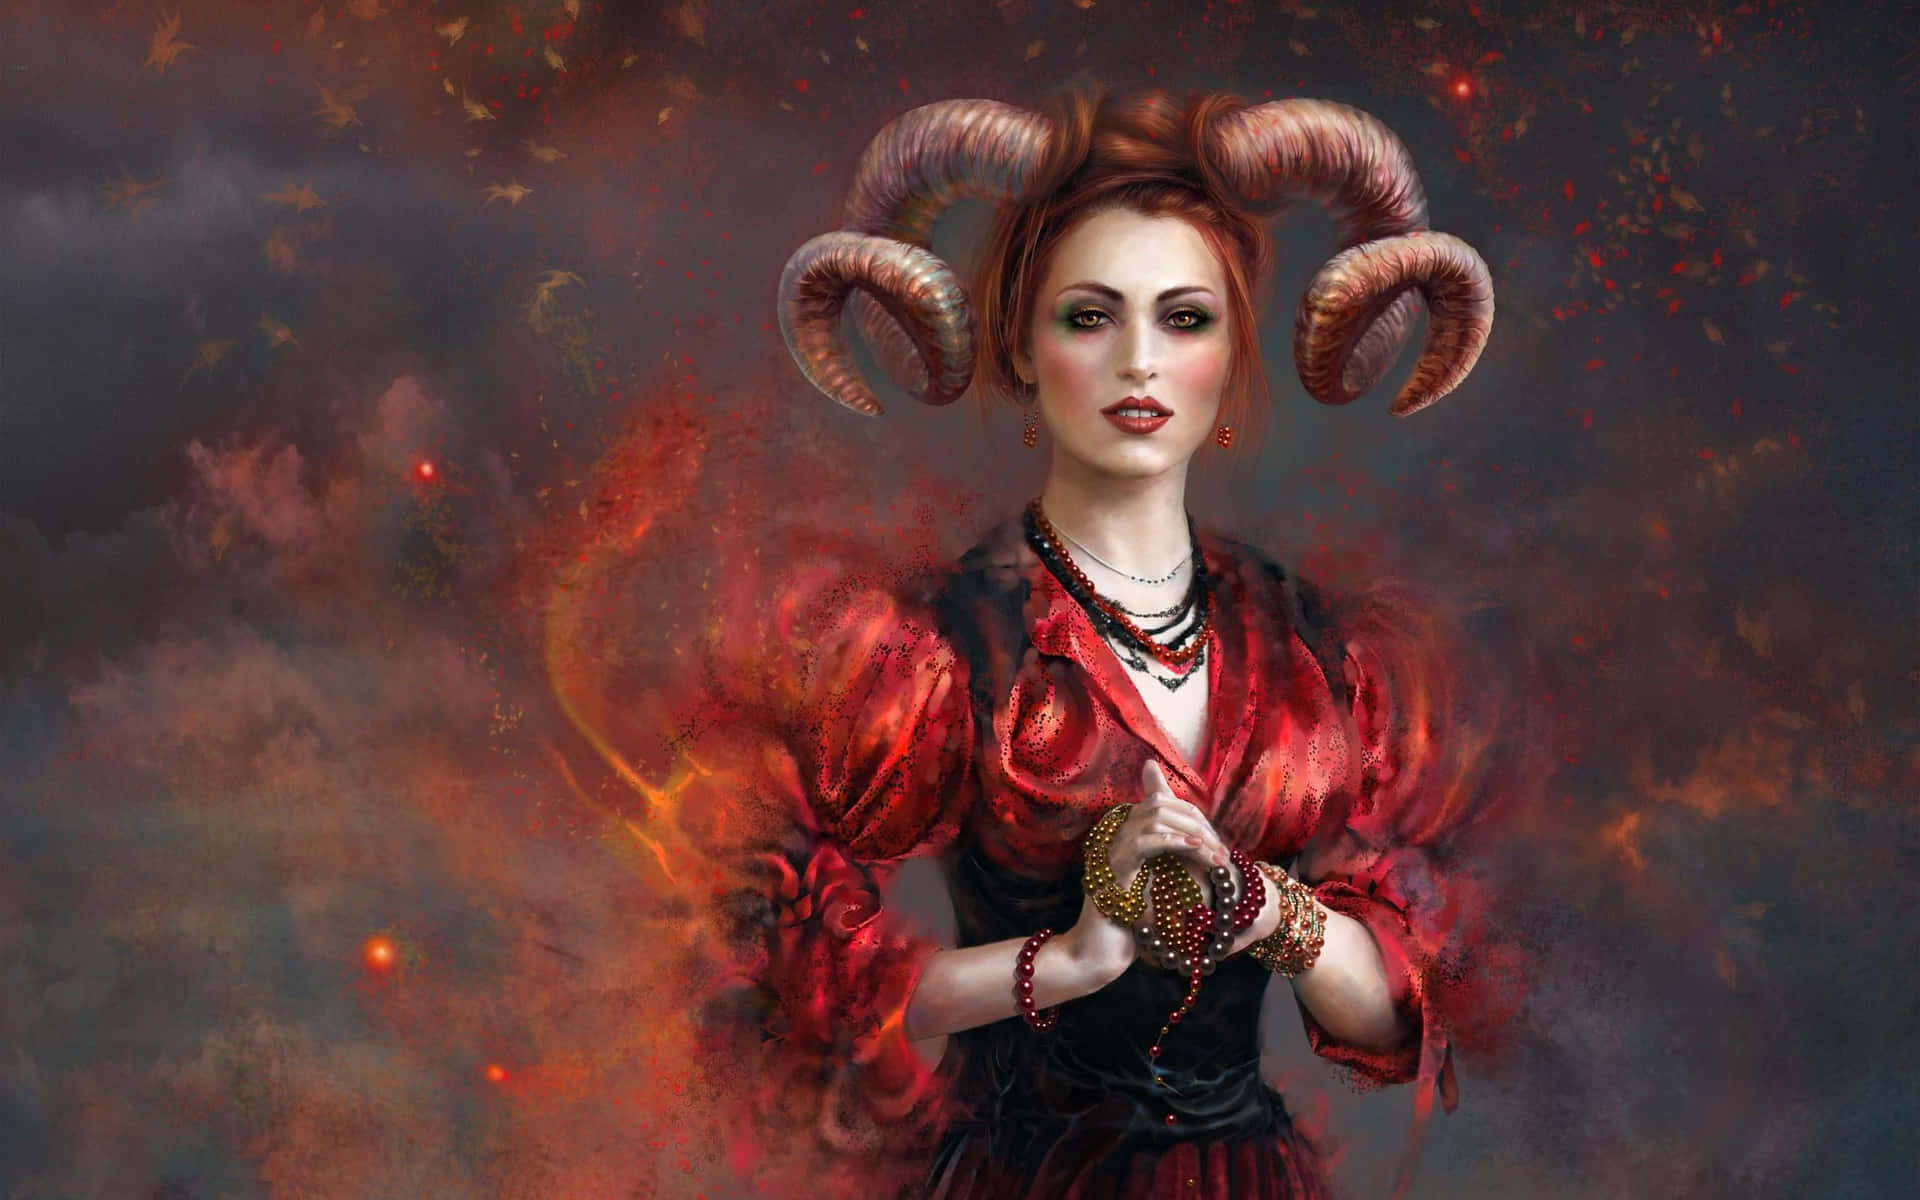 Caption: "Majestic Illustration of the Aries Zodiac Sign"